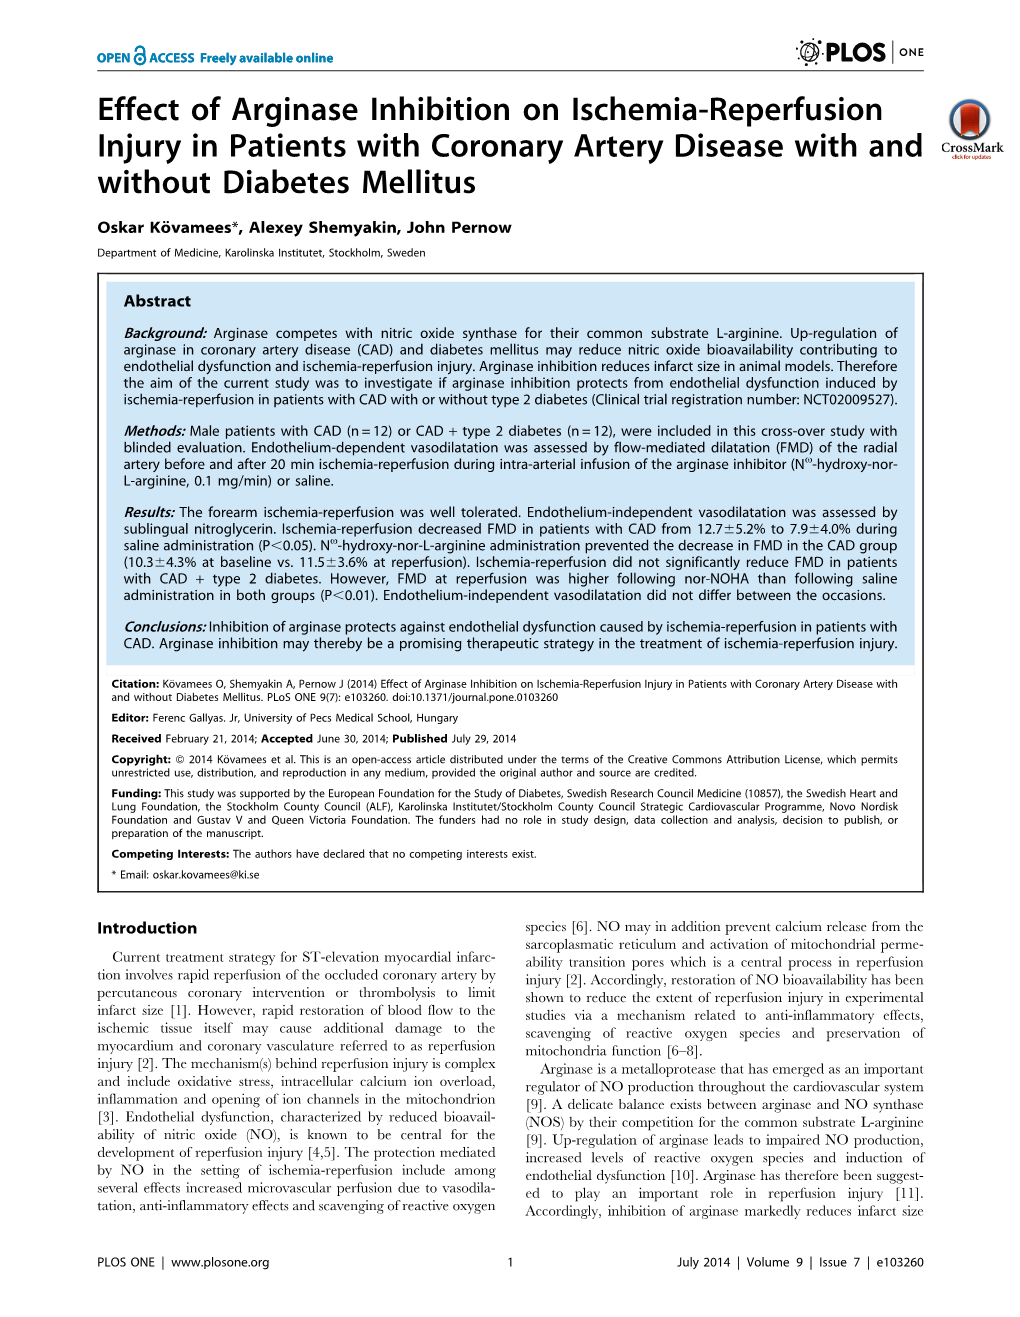 Effect of Arginase Inhibition on Ischemia-Reperfusion Injury in Patients with Coronary Artery Disease with and Without Diabetes Mellitus